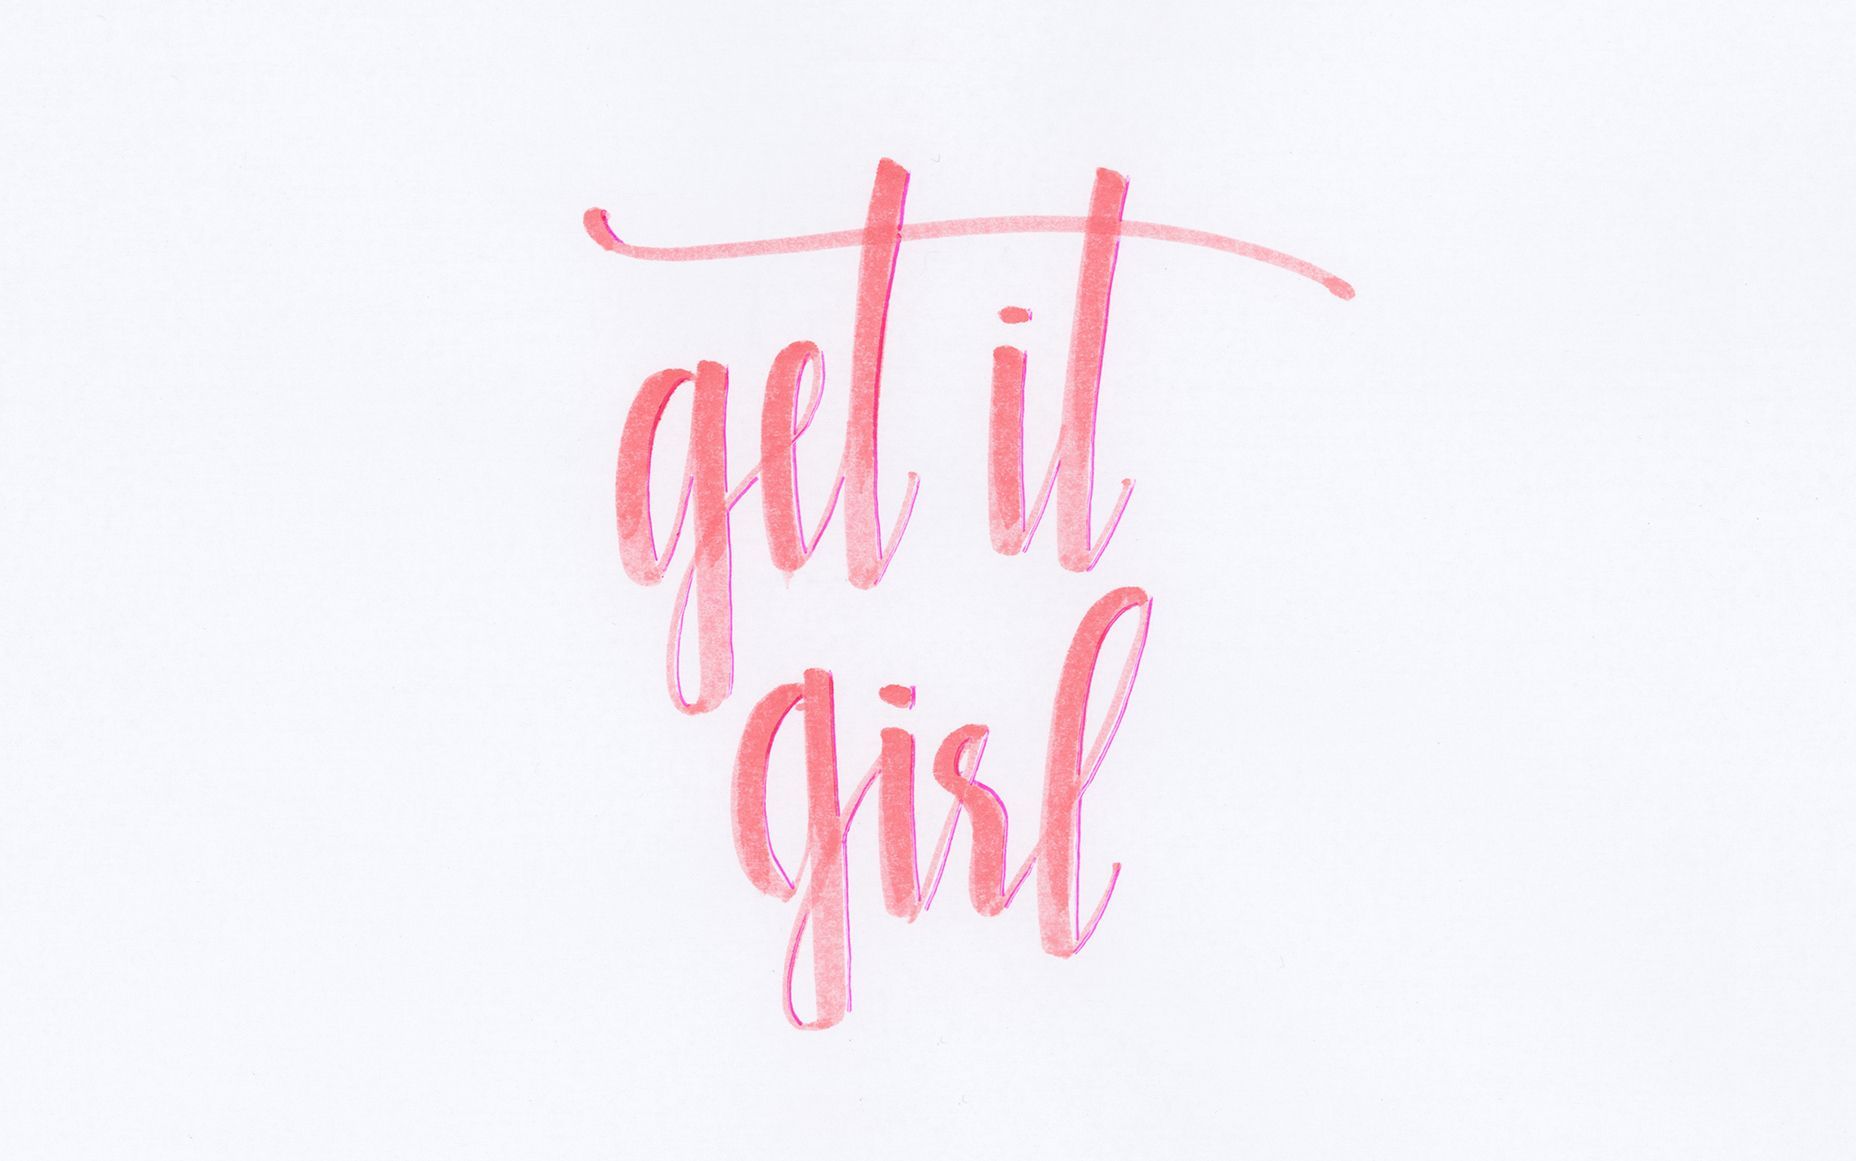 DRESS UP YOUR TECH. Girl boss quotes, Words, Boss quotes